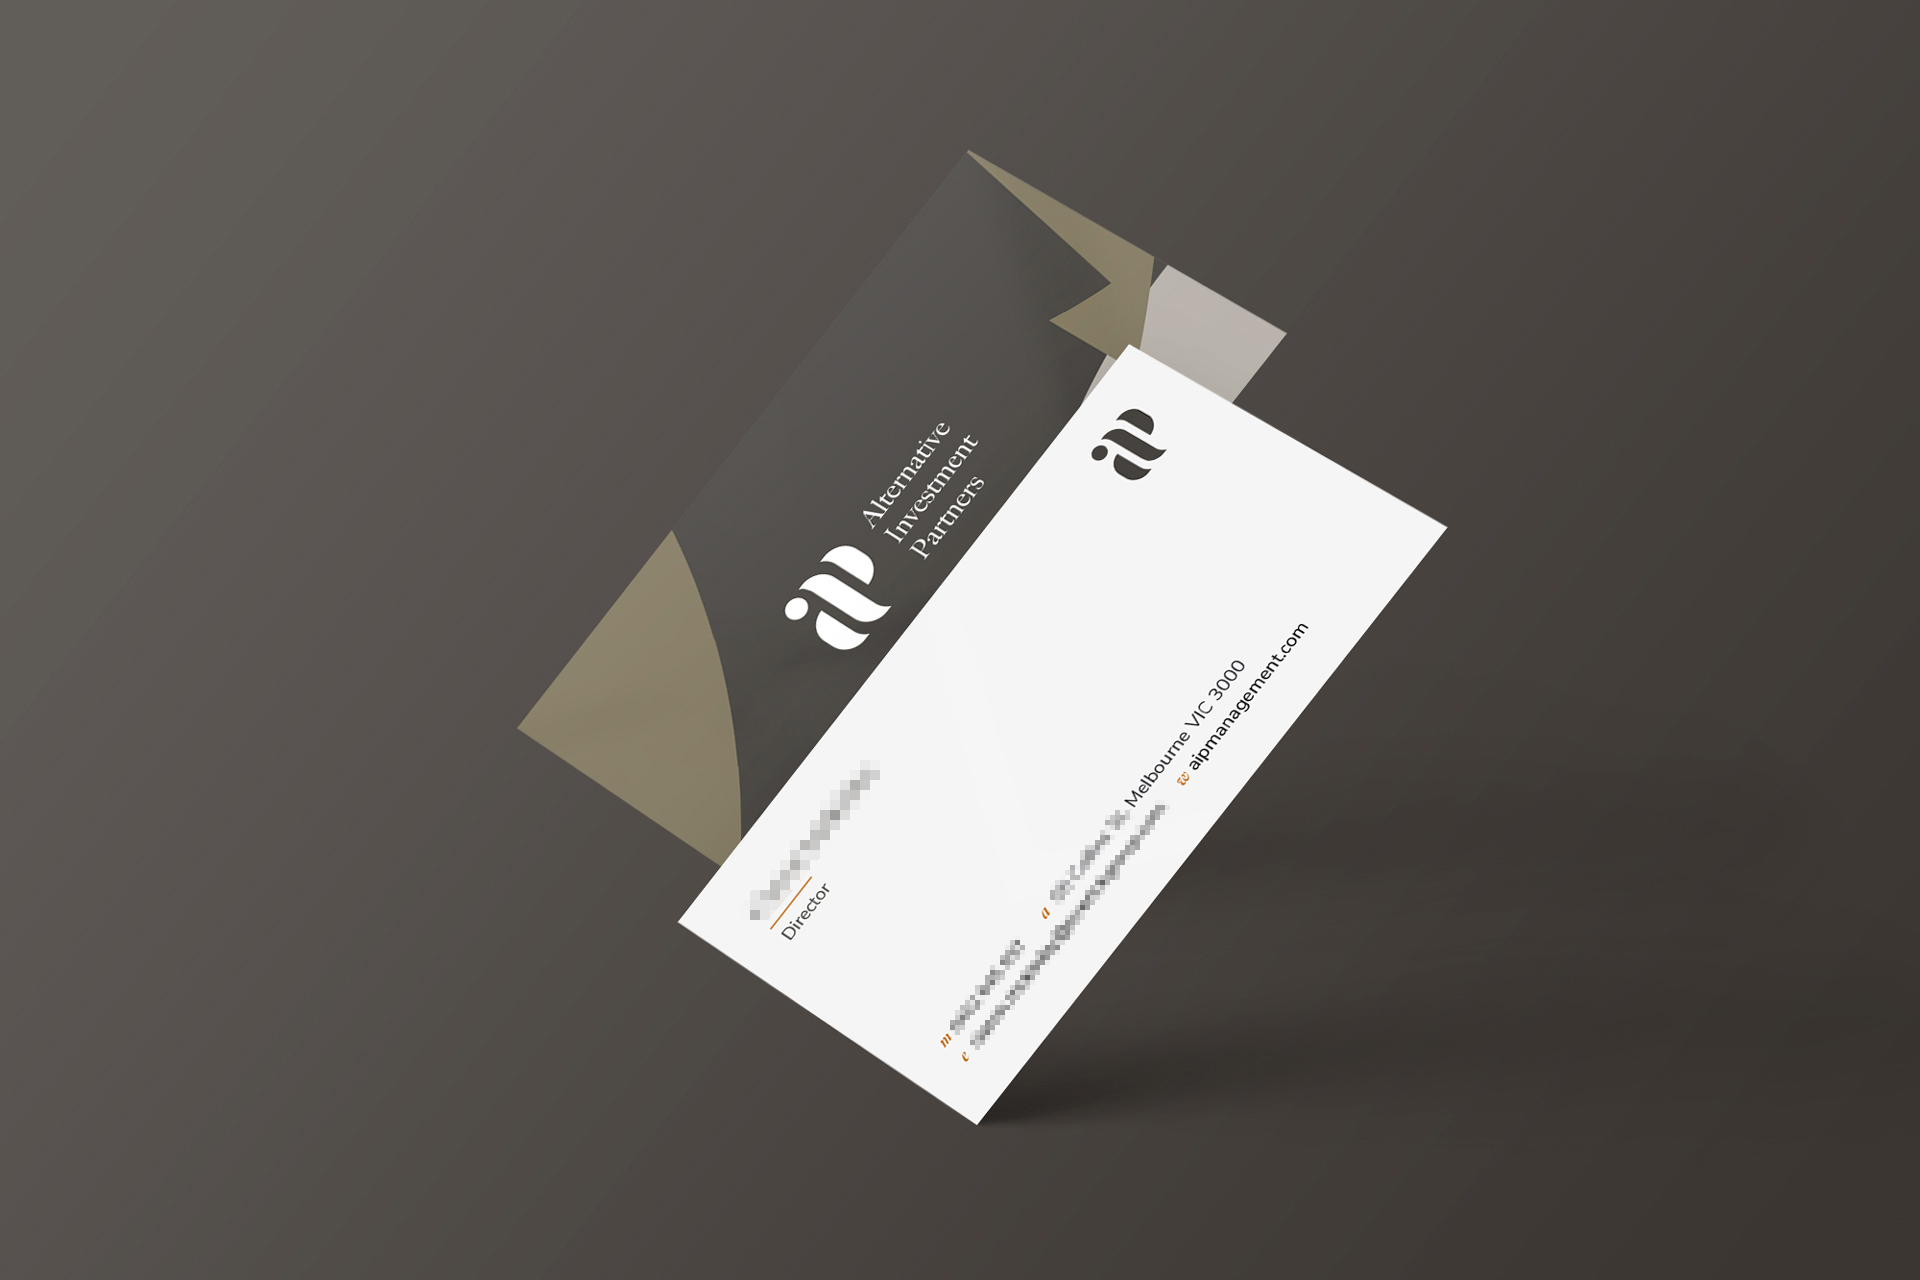 agriculture investment branding by Z Creative Studio Branding & Graphic Design Melbourne